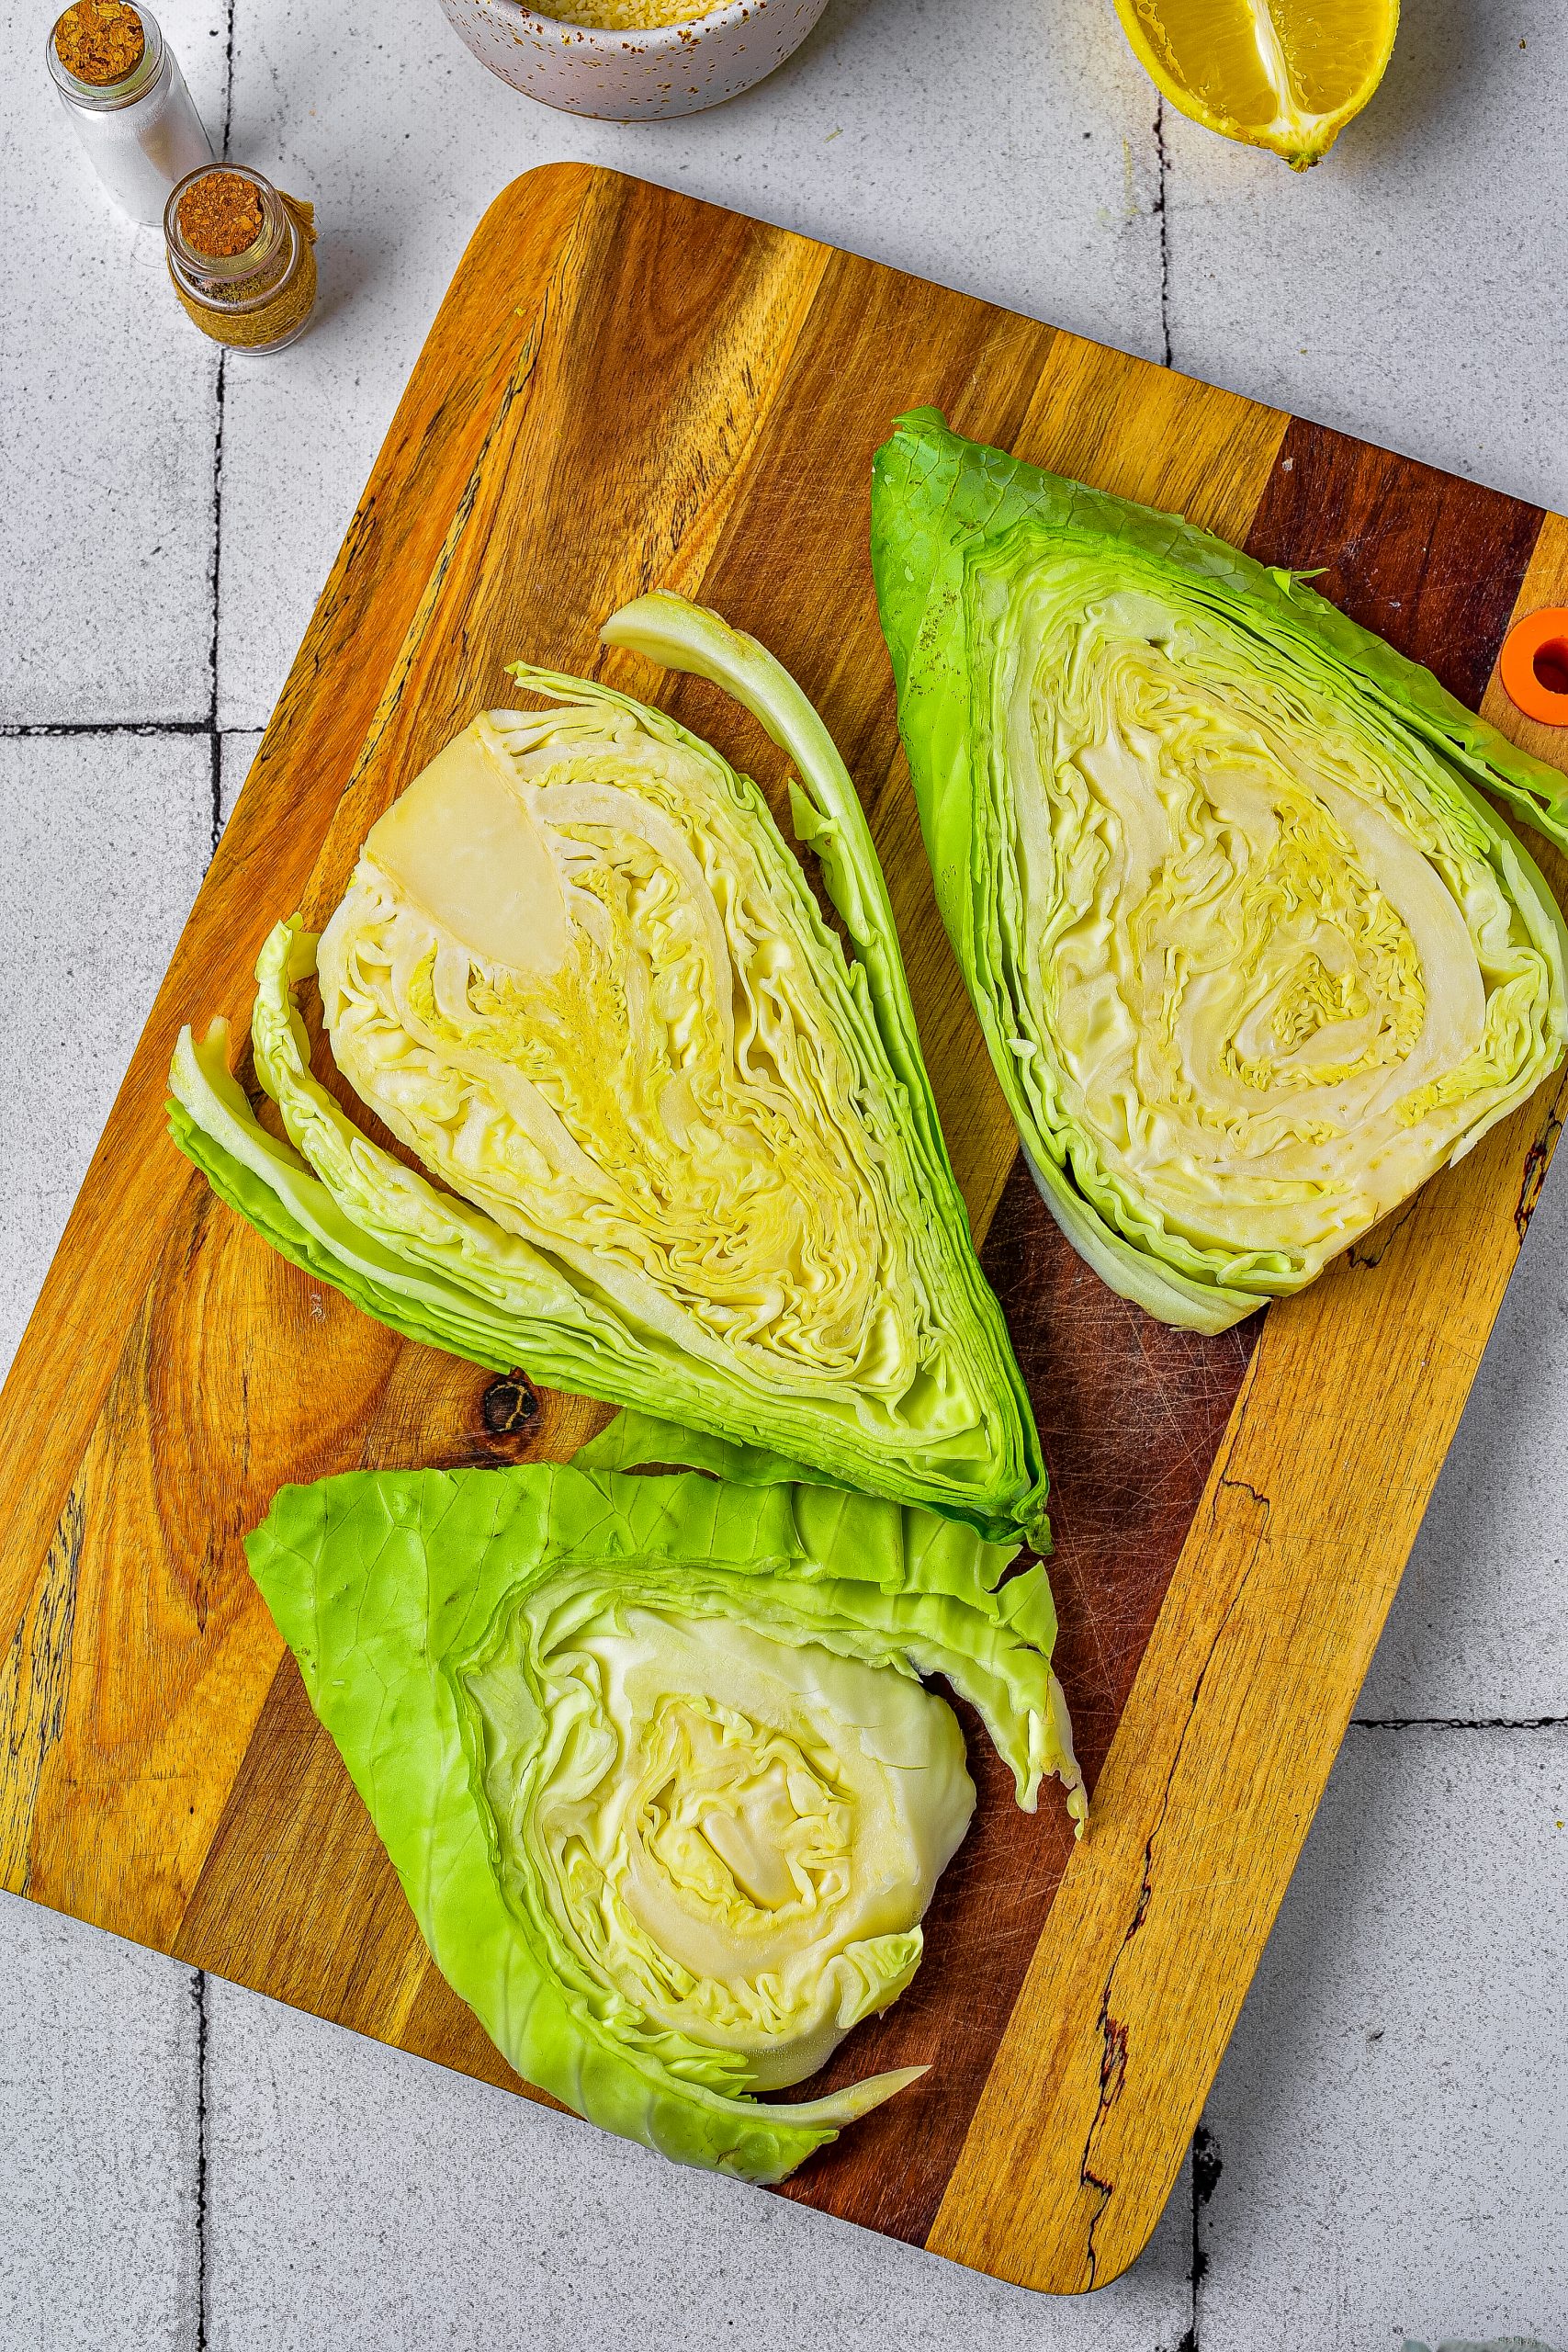 Slice the cabbage into thick “steak” slices about ¾ of an inch thick